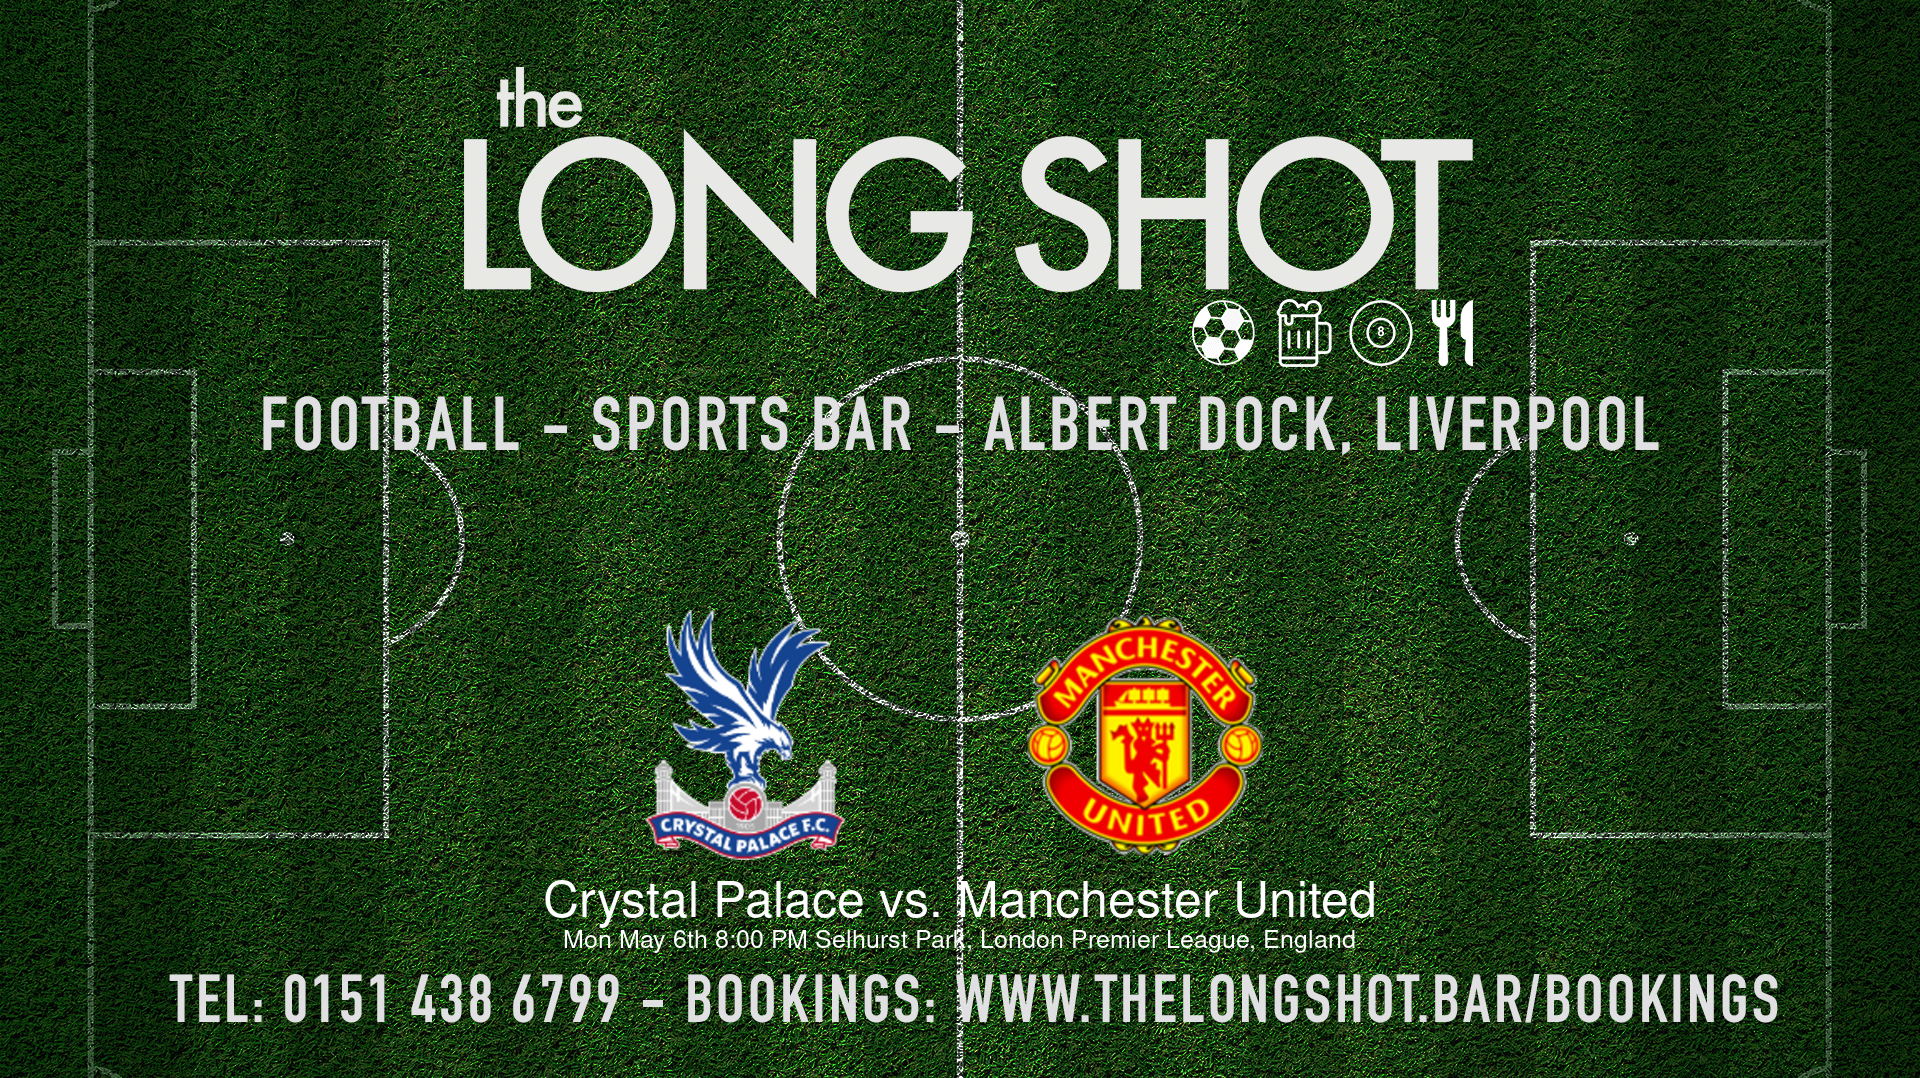 Event image - Crystal Palace vs. Manchester United